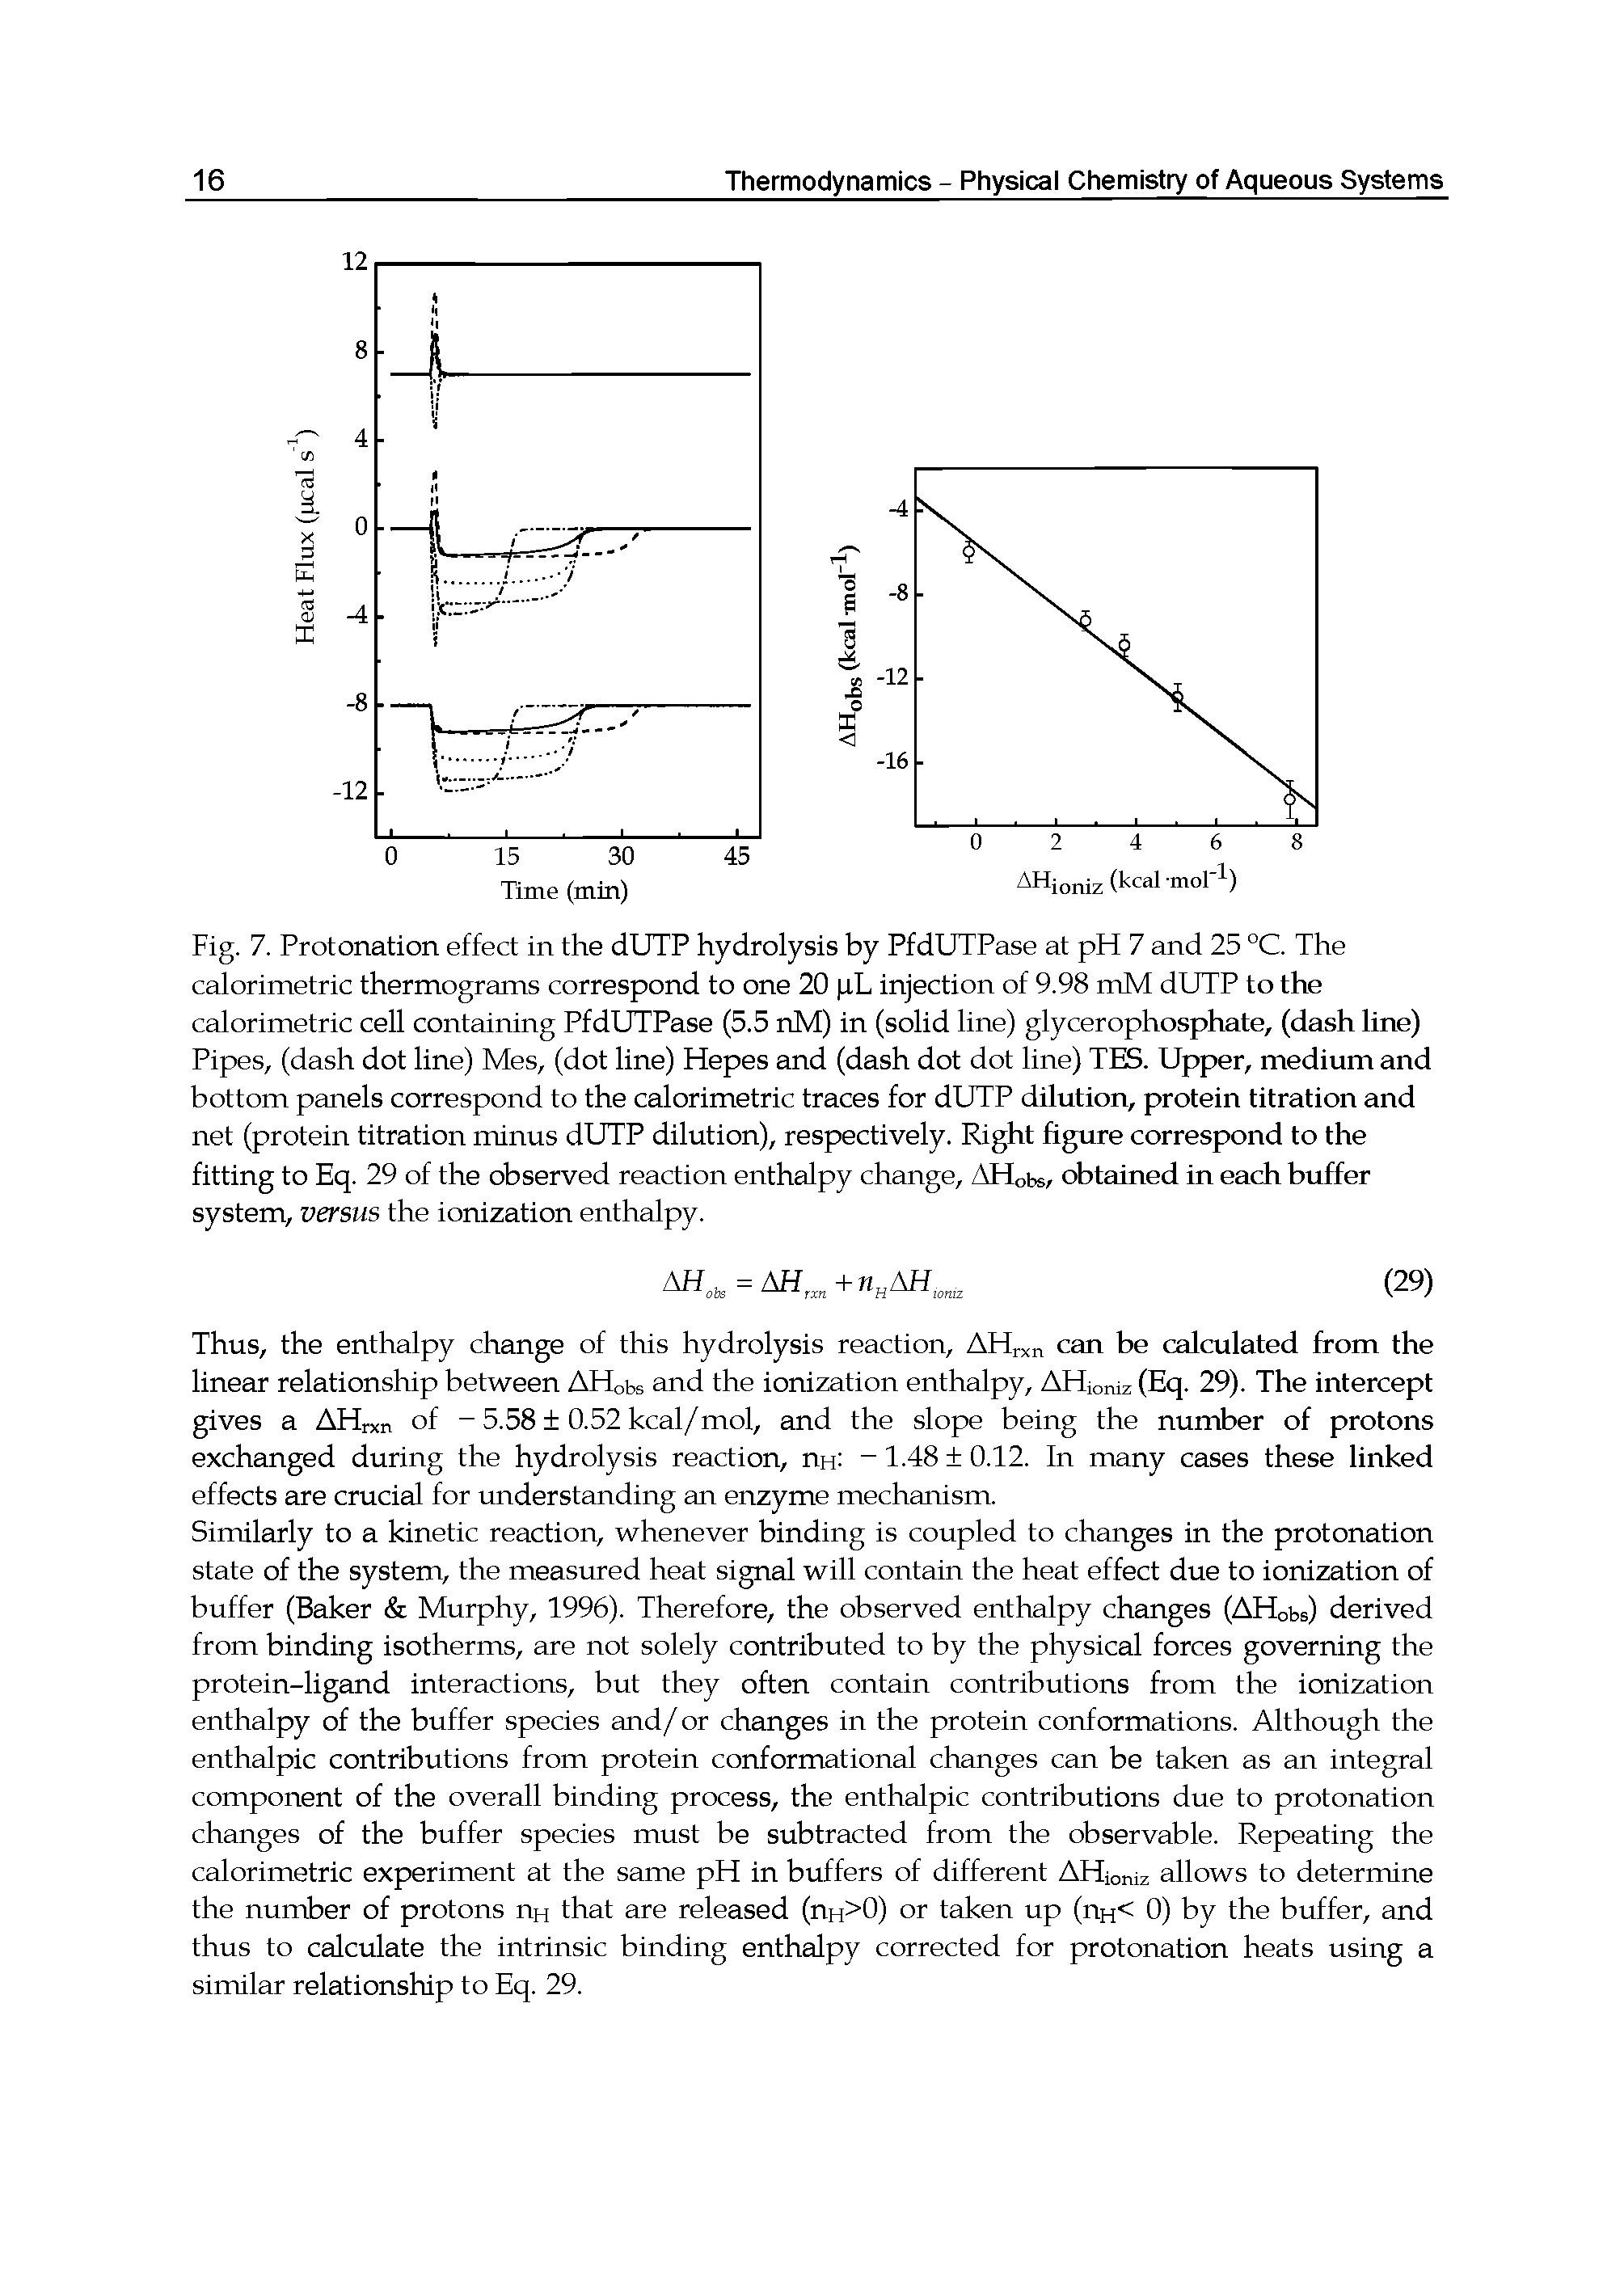 Fig. 7. Protonation effect in the dUTP hydrolysis by PfdUTPase at pH 7 and 25 °C. The calorimetric thermograms correspond to one 20. iL injection of 9.98 mM dUTP to the calorimetric cell containing PfdUTPase (5.5 nM) in (solid line) glycerophosphate, (dash line) Pipes, (dash dot line) Mes, (dot line) Hepes and (dash dot dot line) TES. Upf>er, medium and bottom panels correspond to the calorimetric traces for dUTP dilution, protein titration and net (protein titration minus dUTP dilution), respectively. Right figure correspond to the fitting to Eq. 29 of the observed reaction enthalpy change, AHobs, obtained in each buffer system, versus the ionization enthalpy.